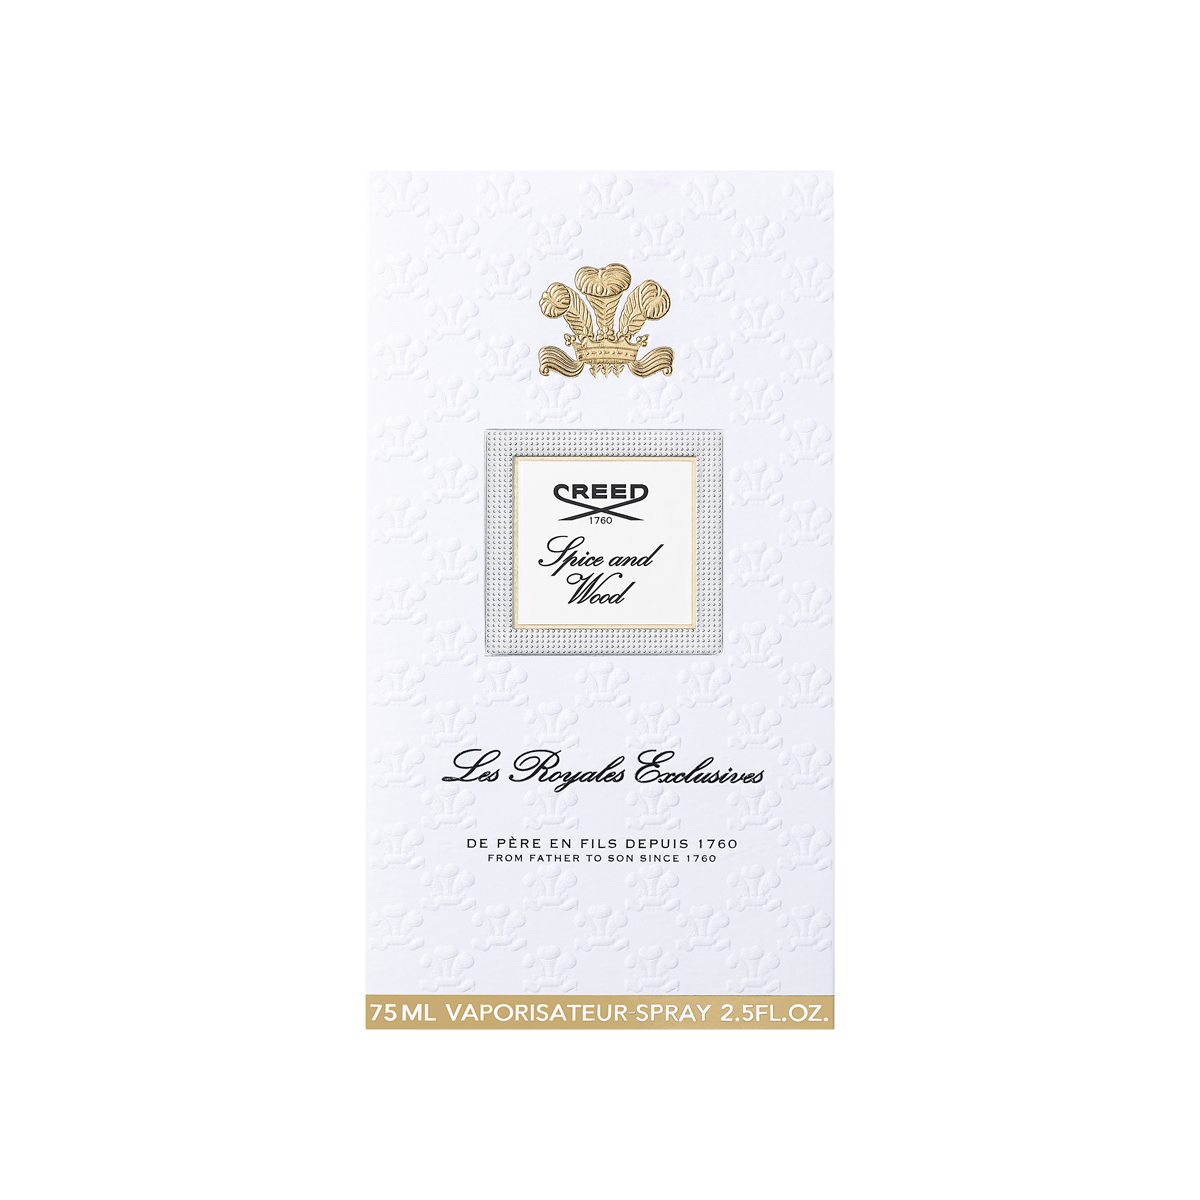 Creed - Royal Exclusives Spice and Wood